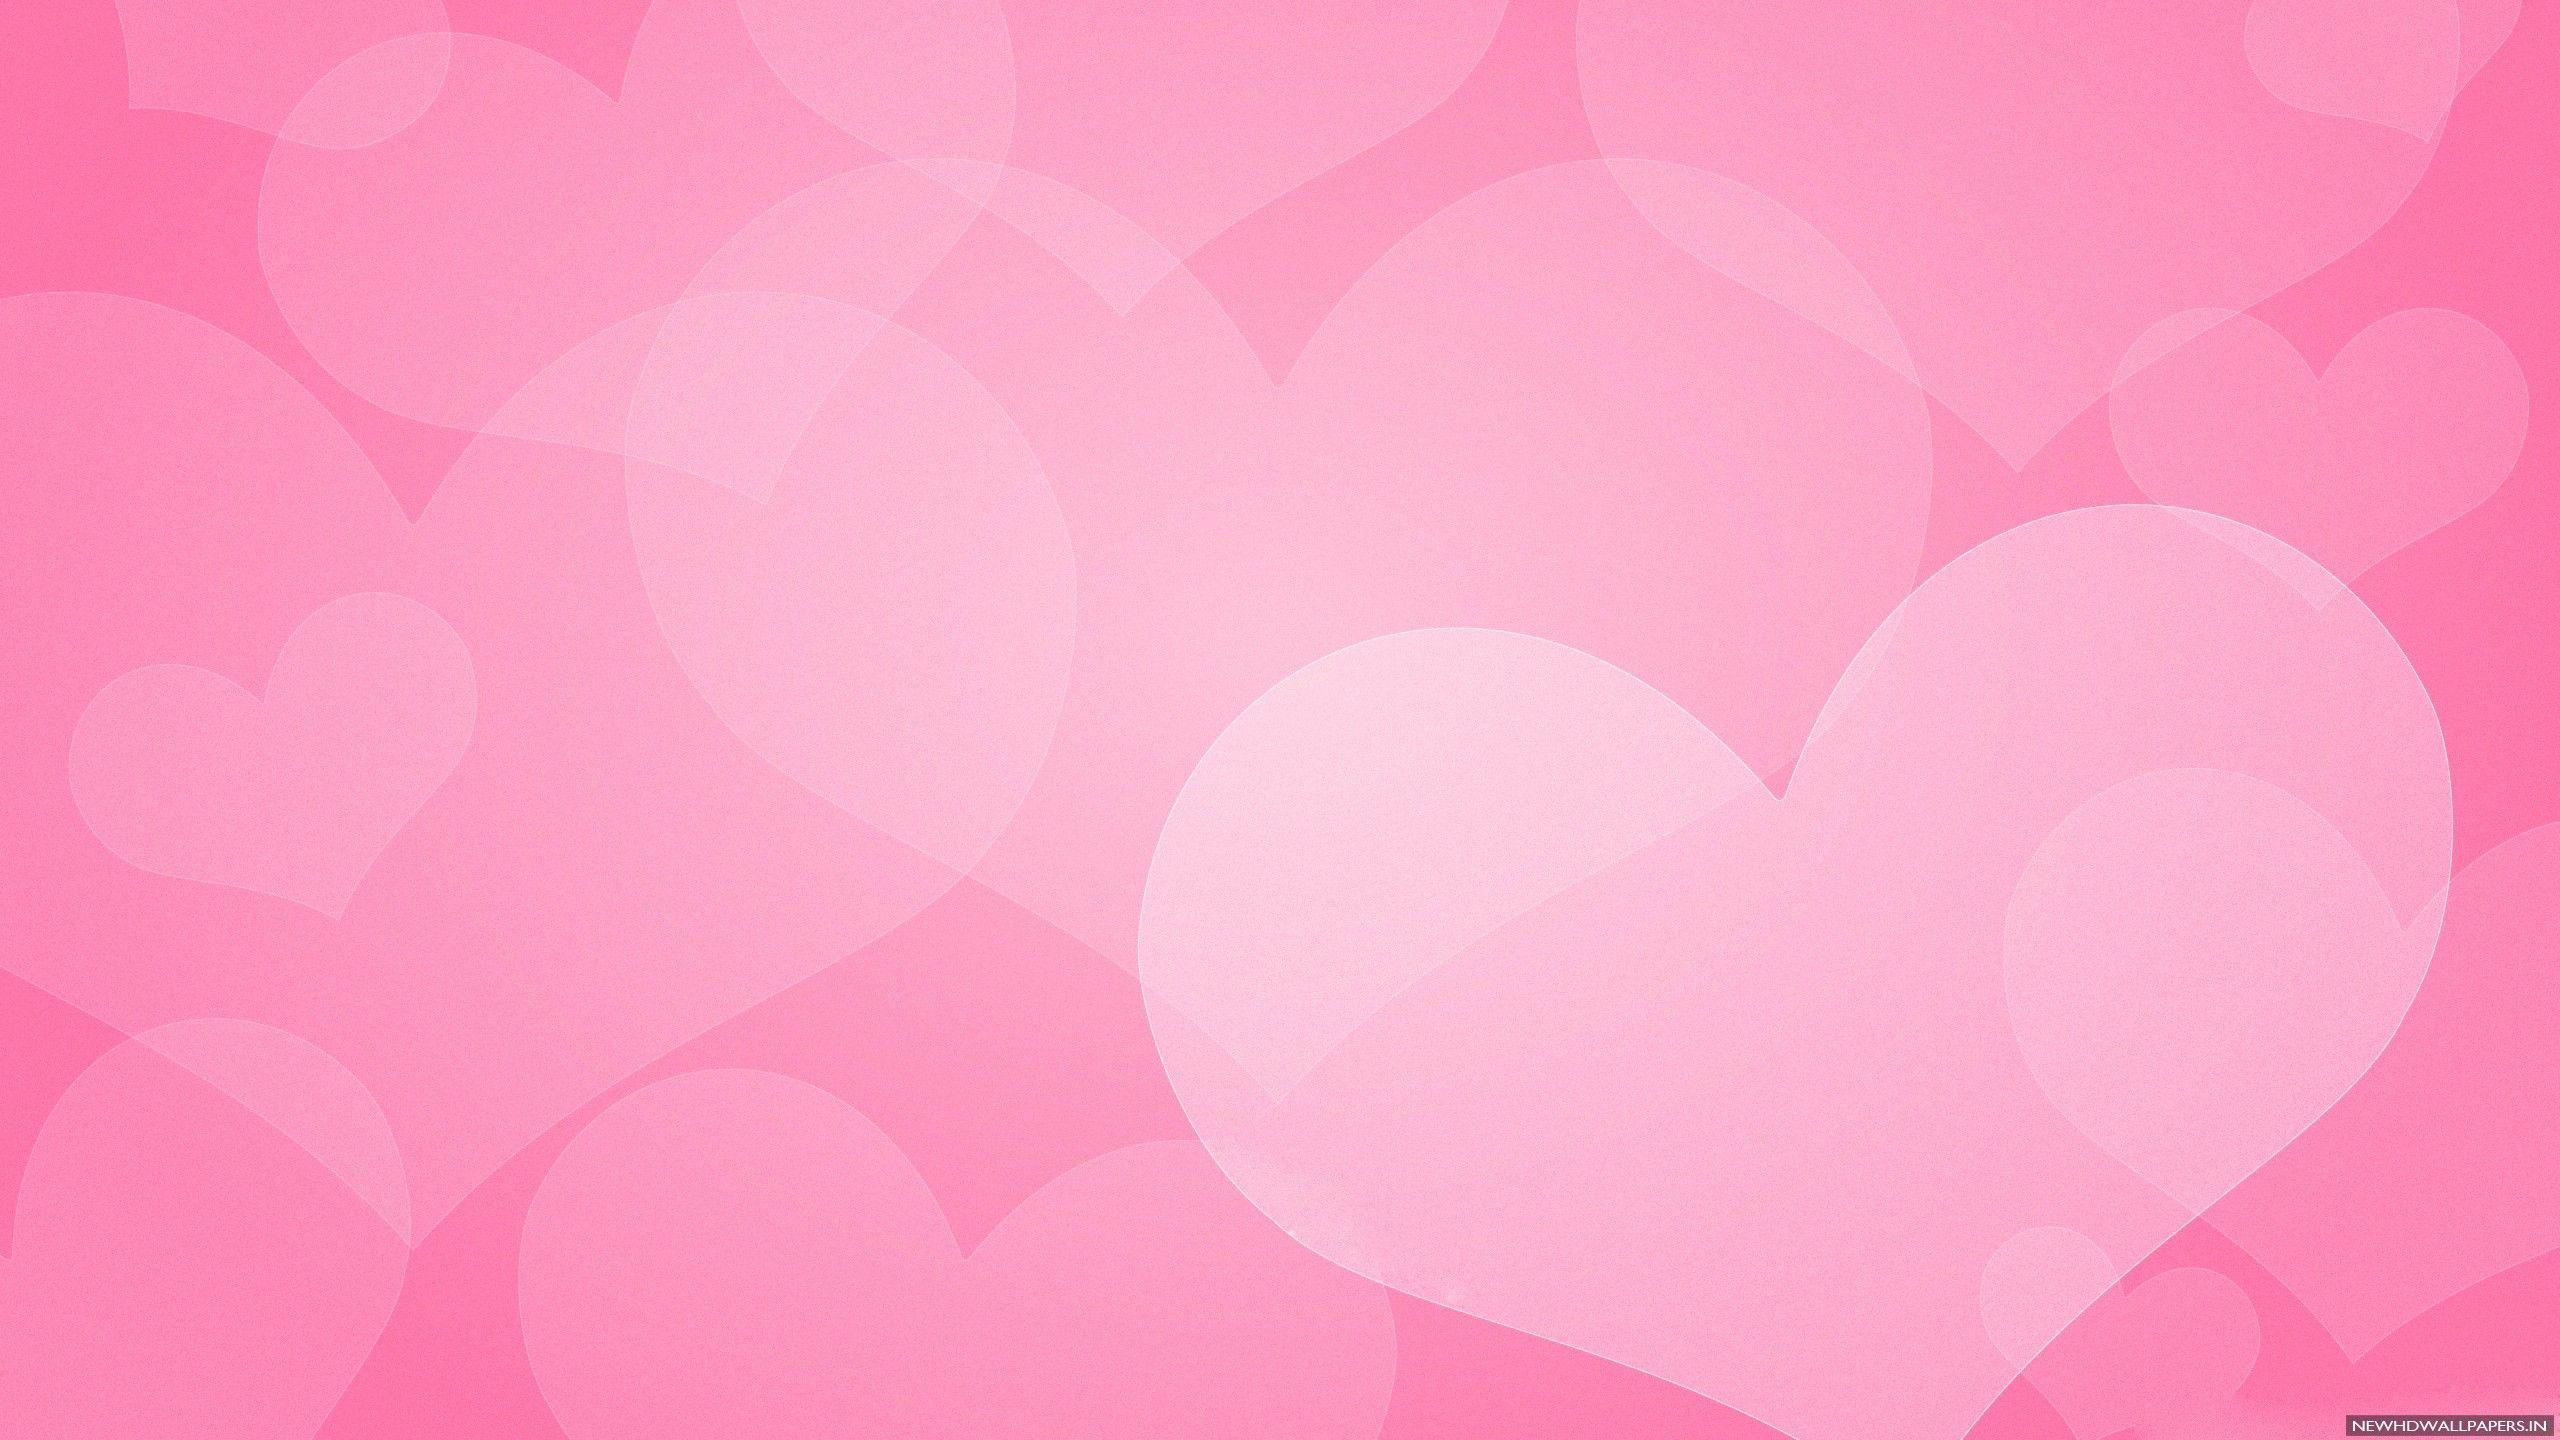 Background Image Of Love